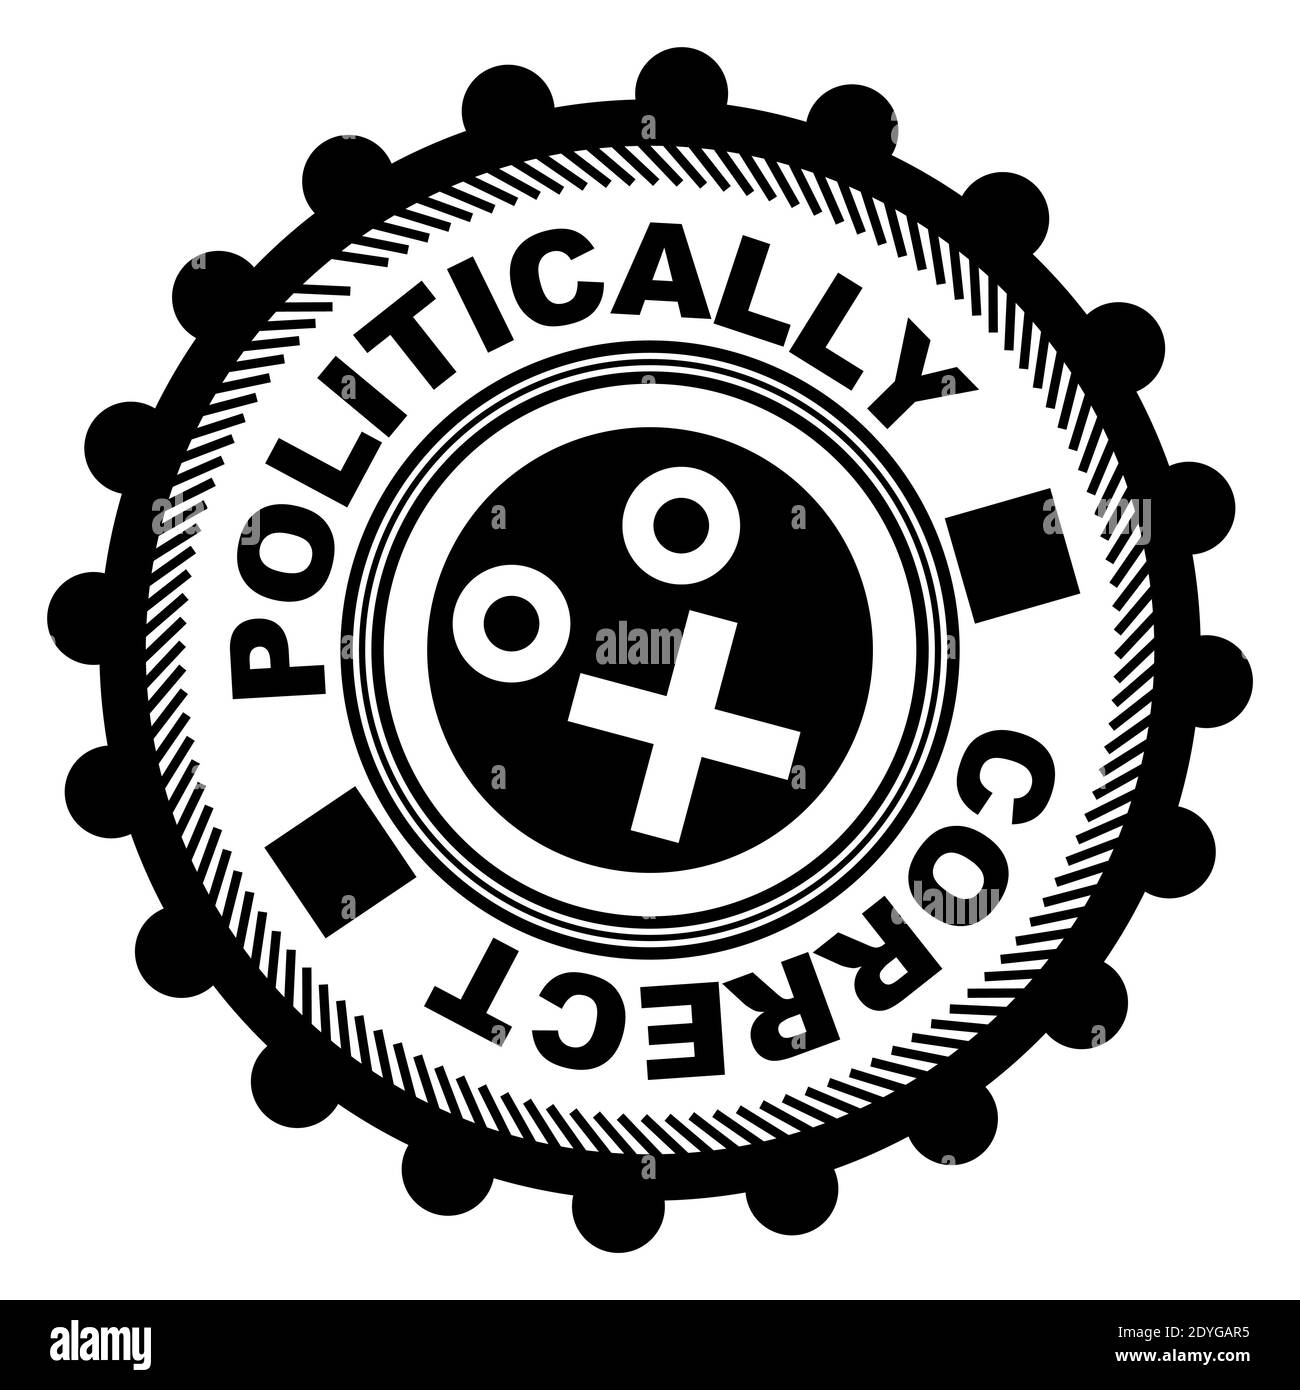 Politically correct stamp. Political correctness as way of censorship - freedom of speech crisis Stock Photo